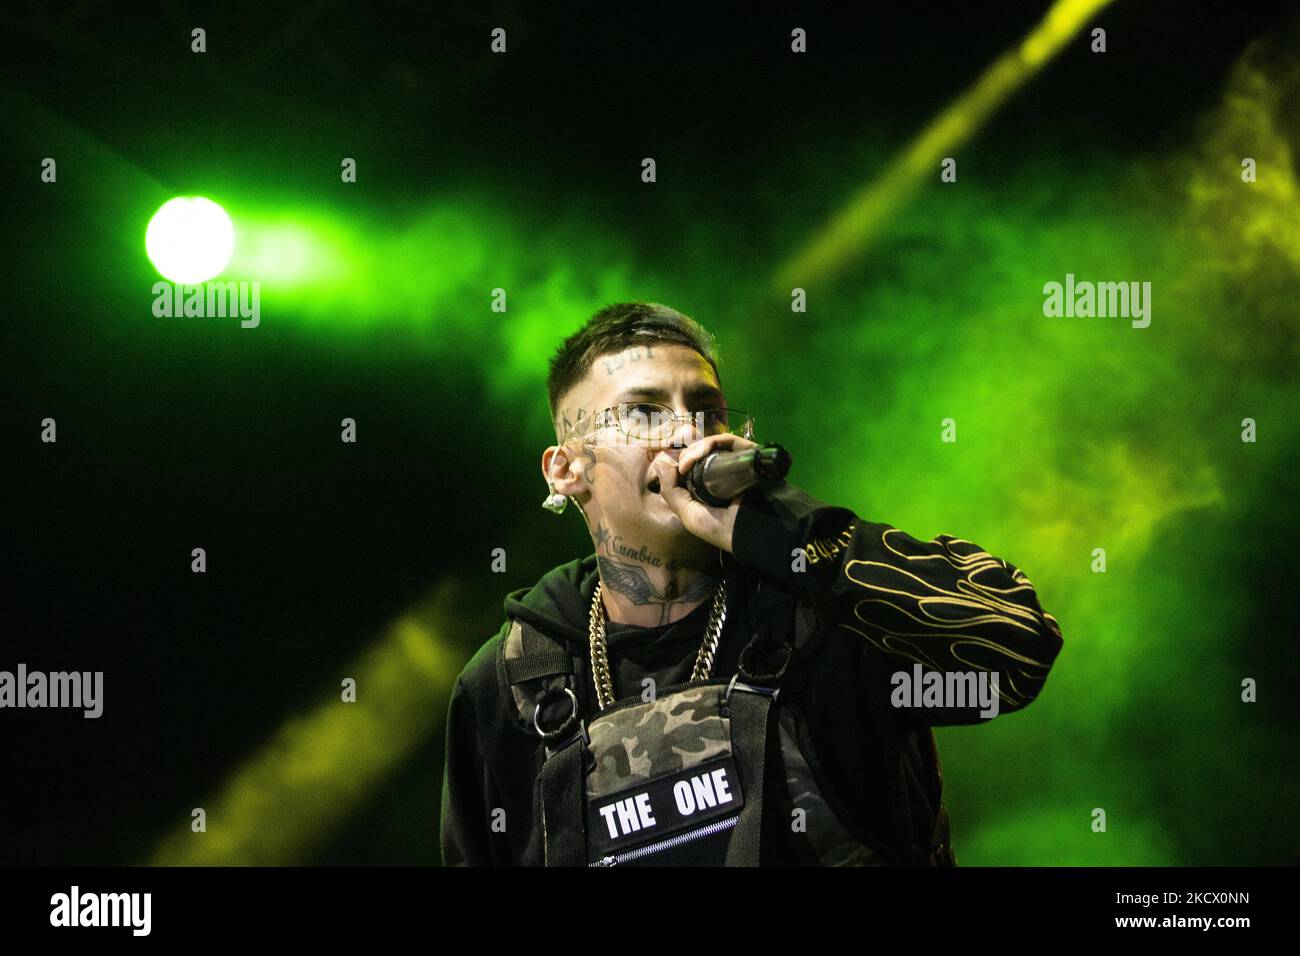 Argentine singer and songwriter Elian Valenzuela, known professionally as L-Gante Keloke, performs during a show in Buenos Aires, Argentina November 29, 2021. (Photo by Matías Baglietto/NurPhoto) Stock Photo